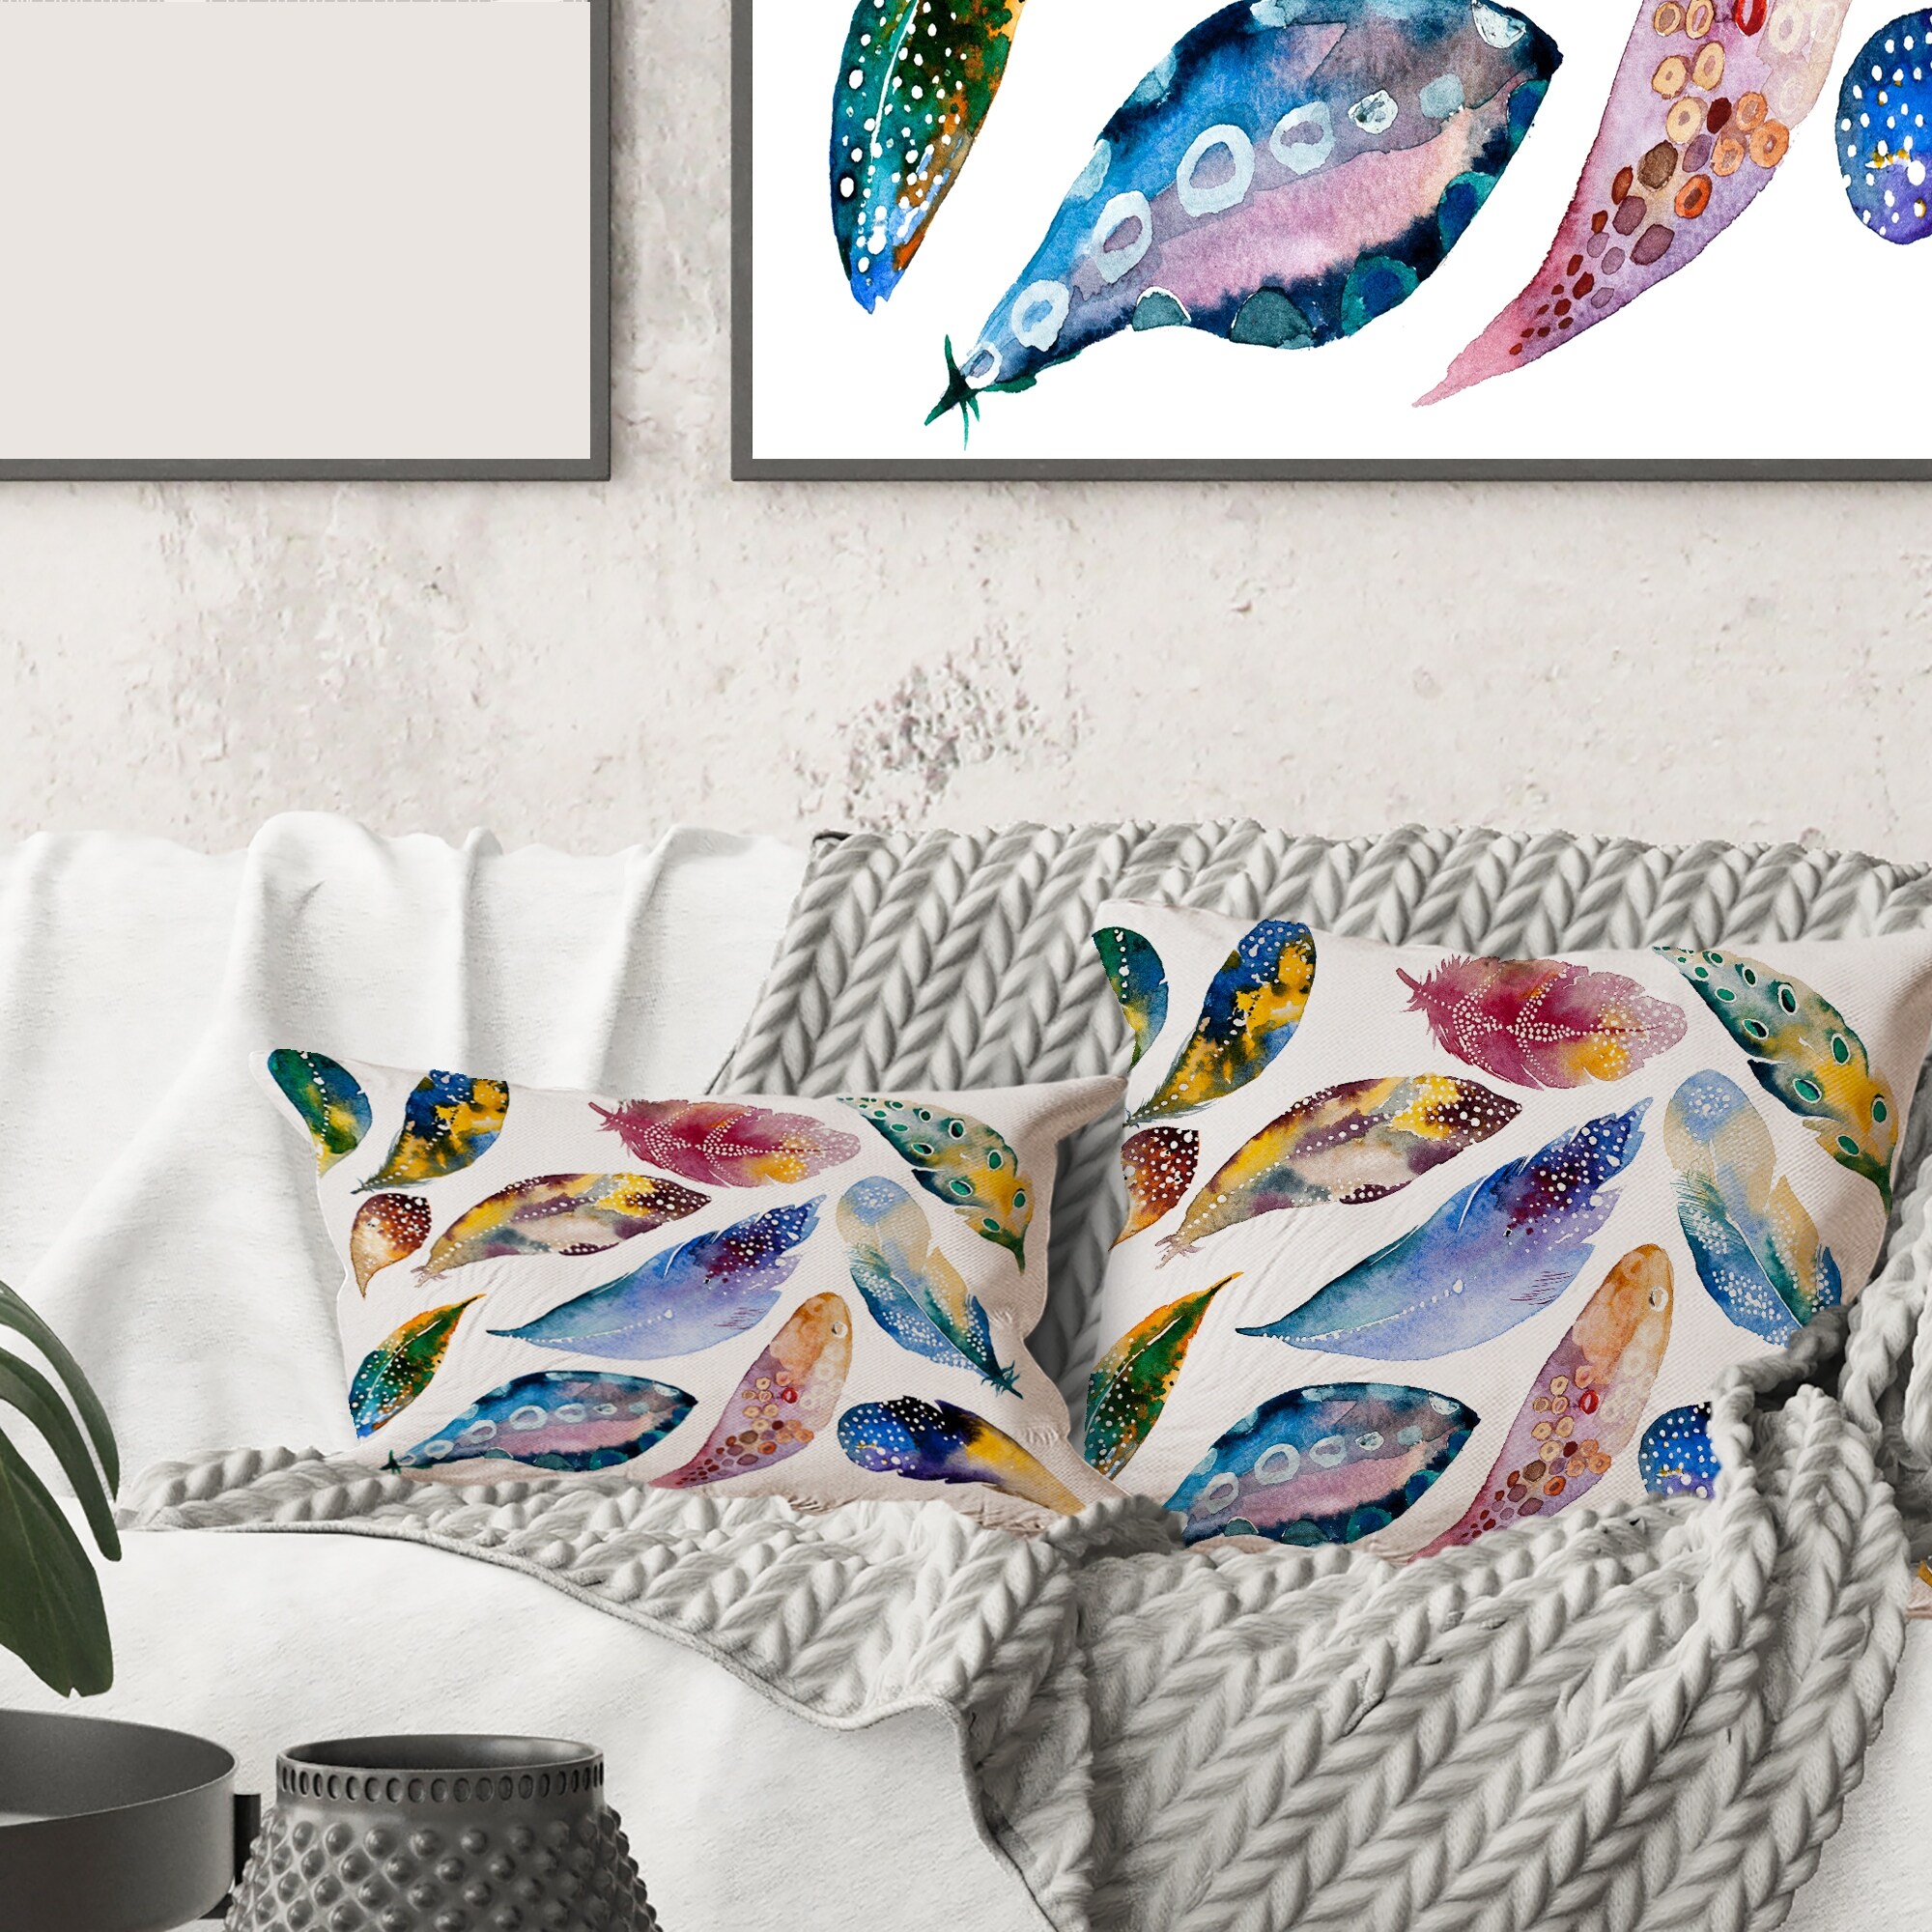 https://ak1.ostkcdn.com/images/products/is/images/direct/9ea367cfd7da853263fecd811989f81fcd601bf1/Designart-%27Colourful-Boho-Feather-Set-VI%27-Bohemian-%26-Eclectic-Printed-Throw-Pillow.jpg